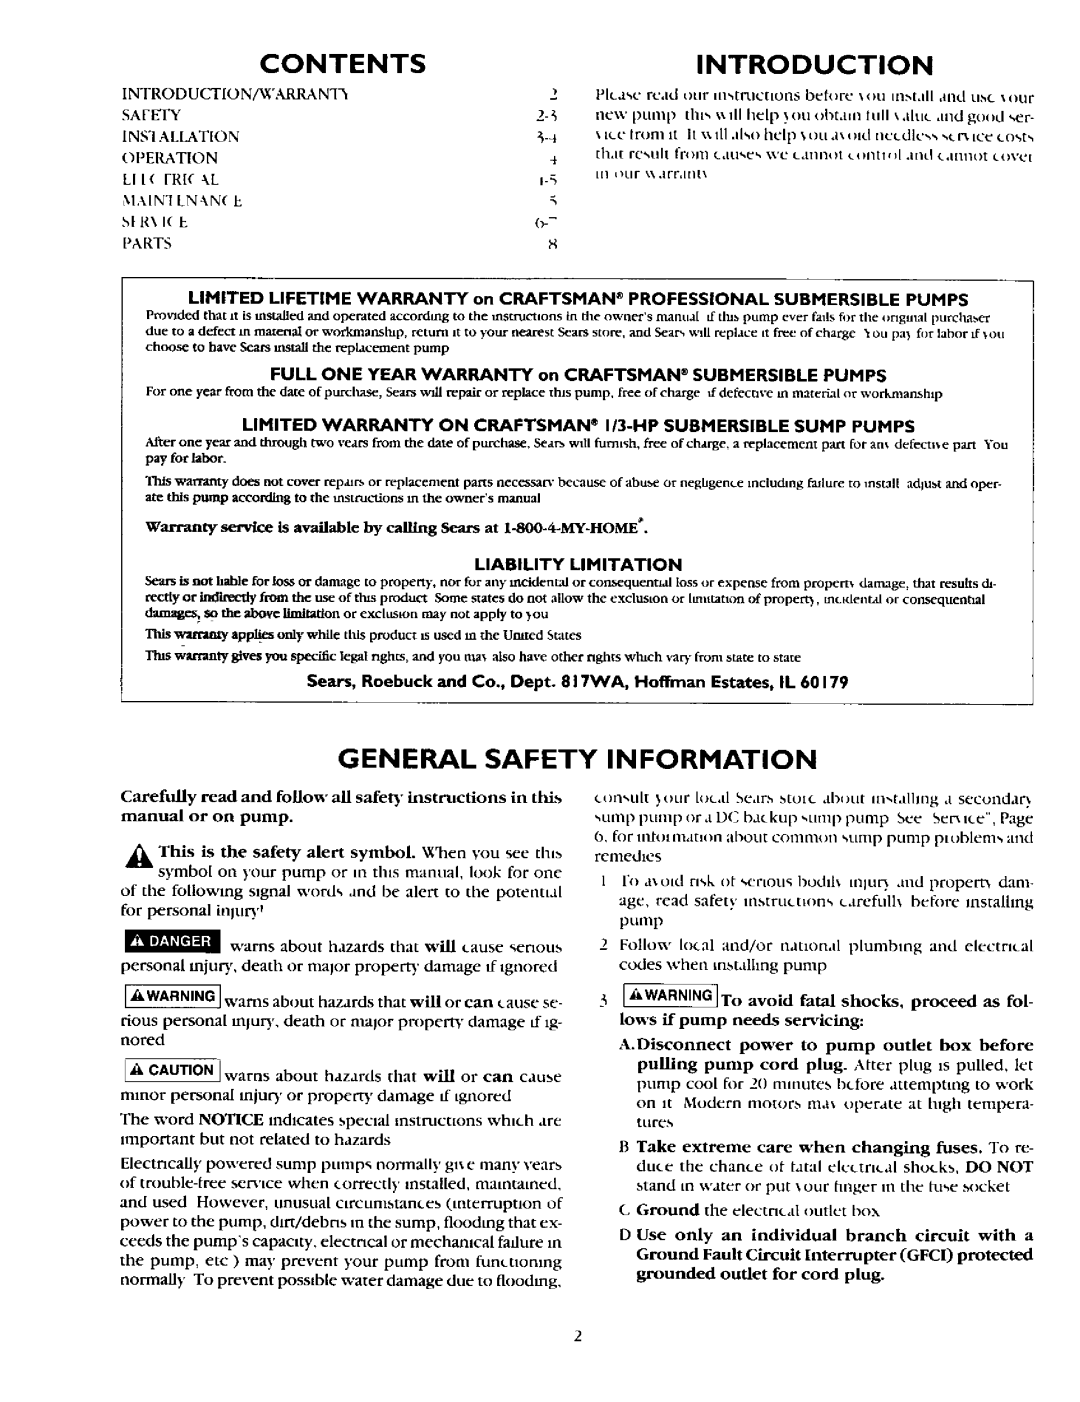 Sears 390.304692 owner manual Contentsintroduction, General Safety Information, Allation, bt R, Liability Limitation, Cures 